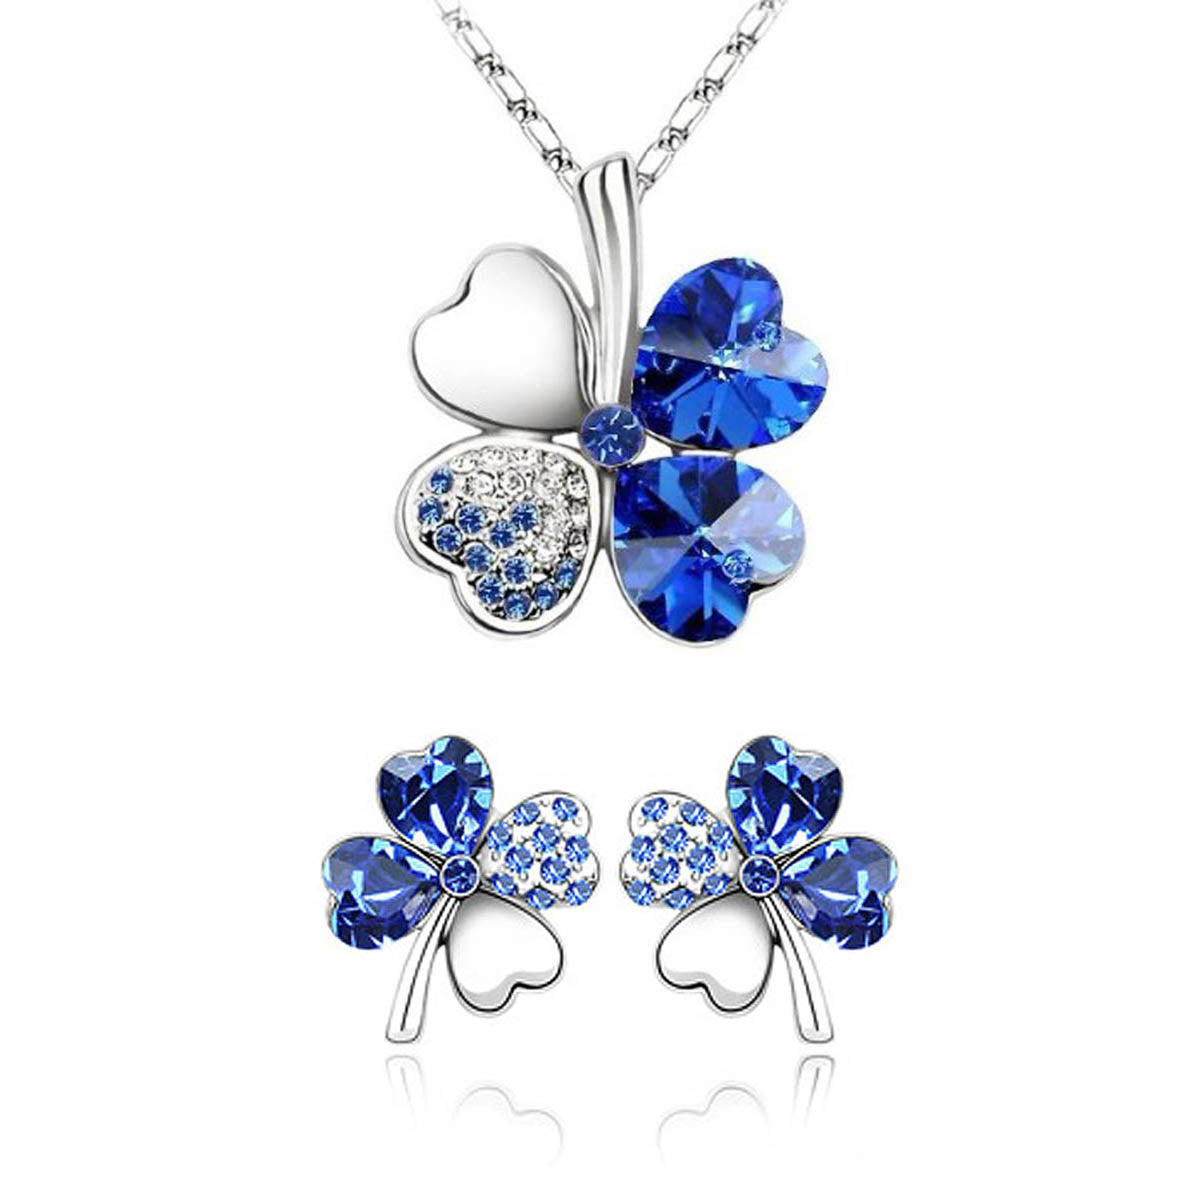 Gold Plated Crystal Four Leaf Clover Pendant Necklace and Earrings Jewelry Set